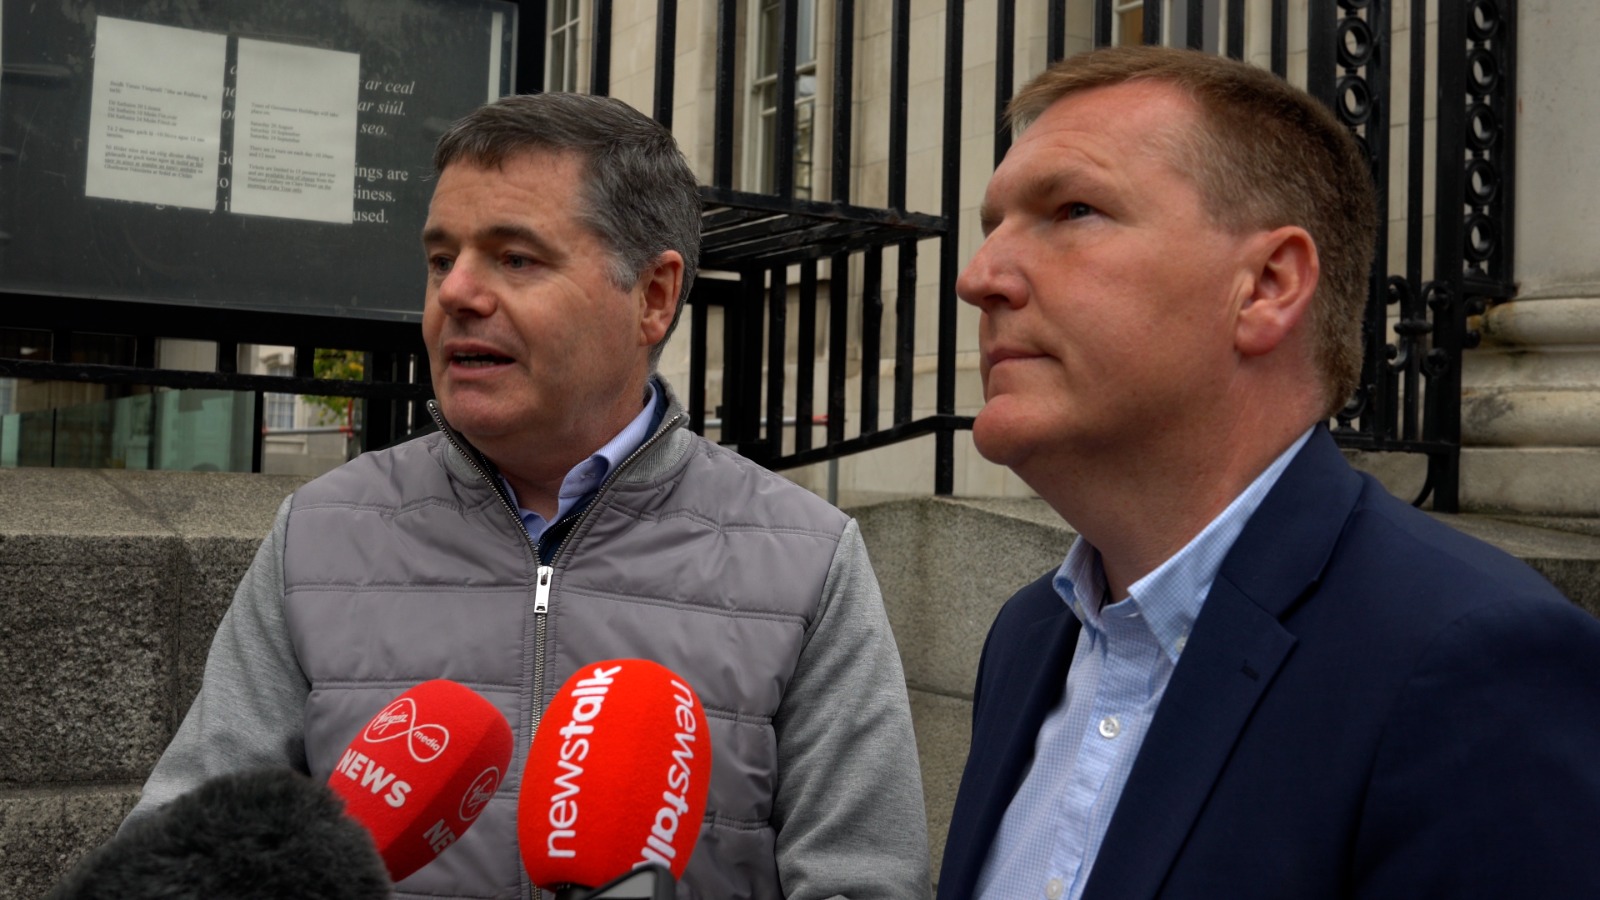 The Finance Minister Paschal Donohoe and Public Expenditure Minister Michael McGrath. Image Tom Douglas/Newstalk